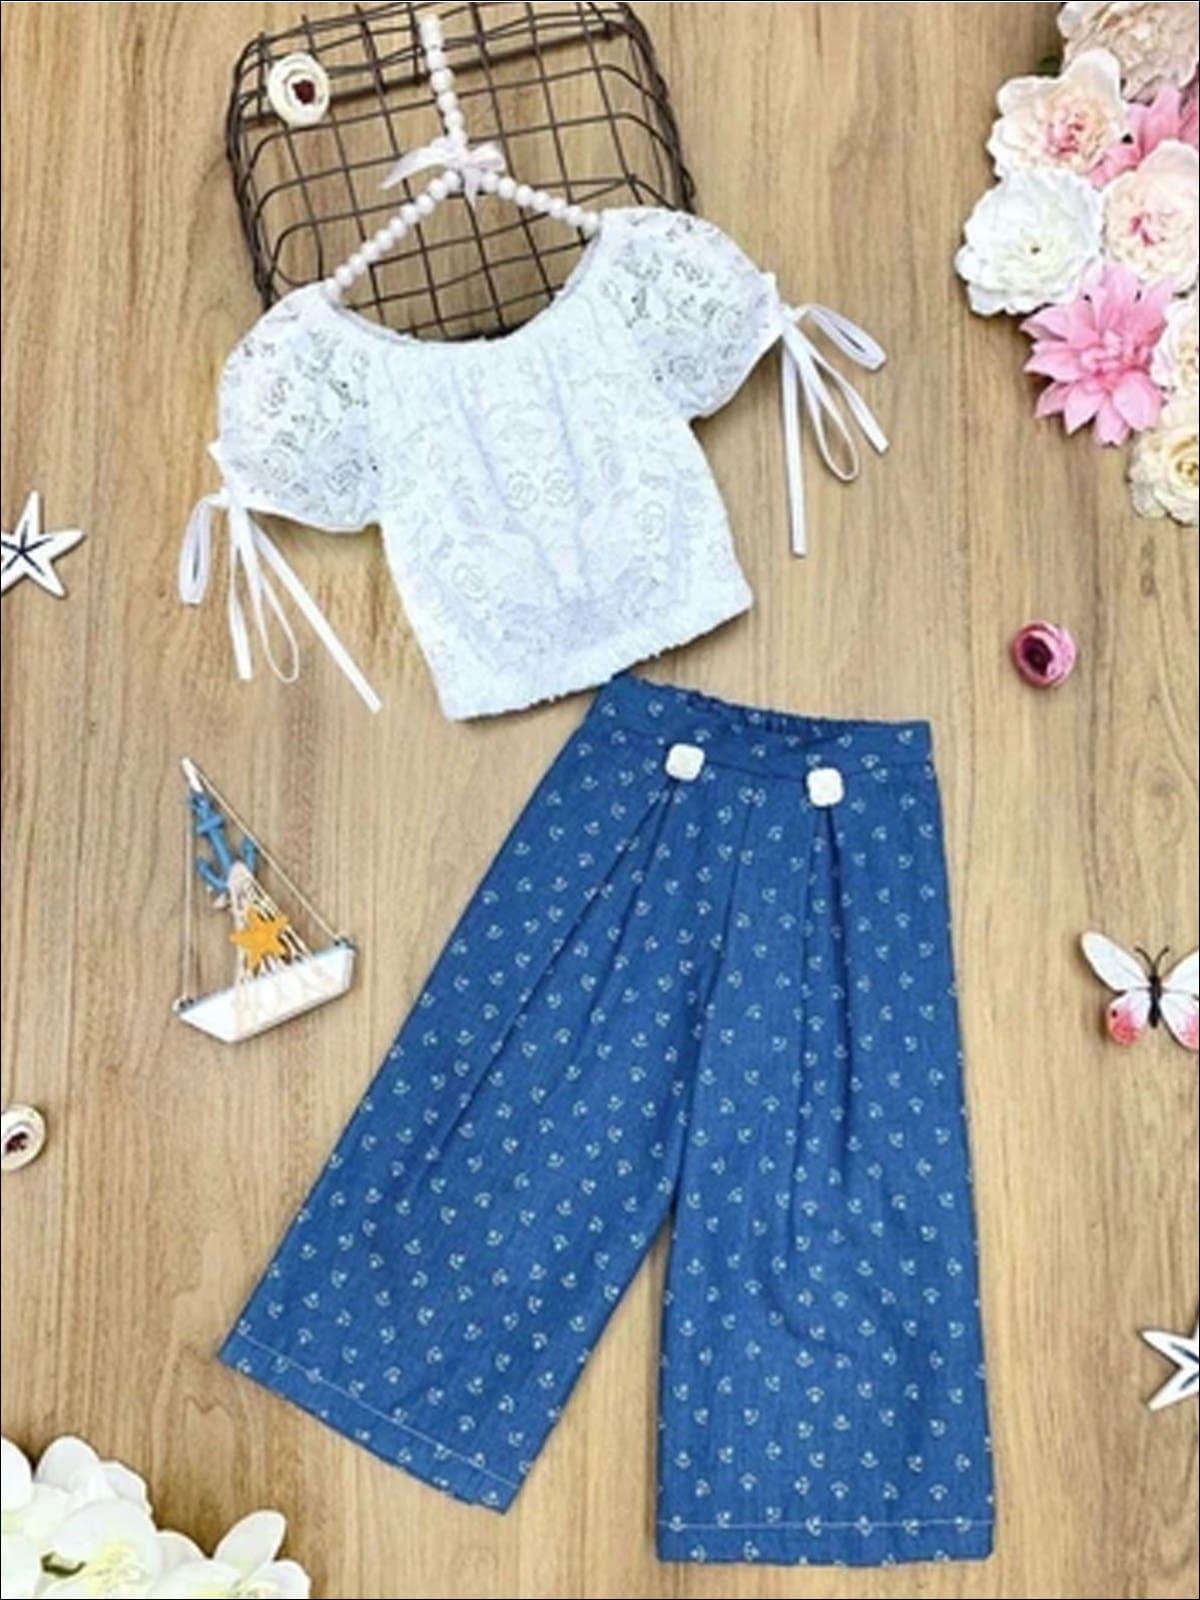 Girls Tie Sleeve Crop Top and Buttoned Palazzo Pants Set - Girls Spring Casual Set